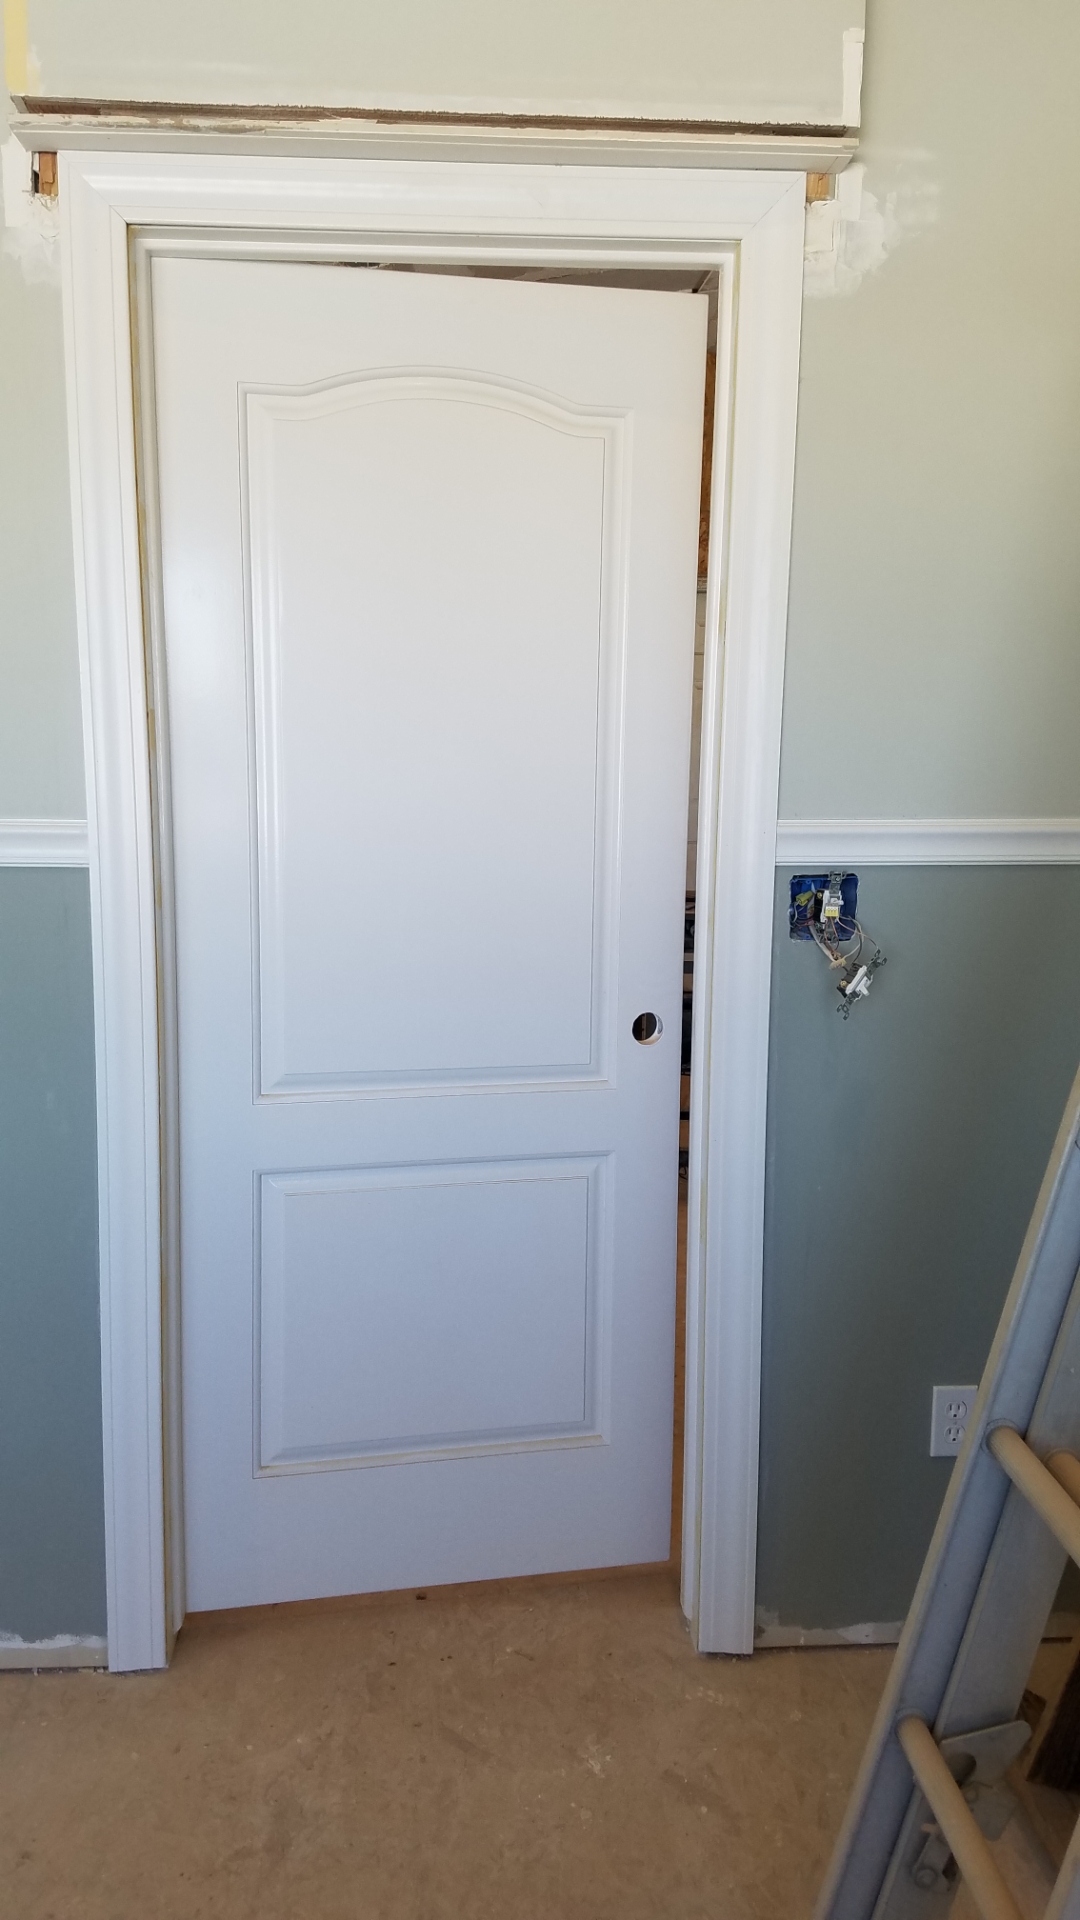 A white solid wood door with a fresh coat of paint hung in a door frame in a room with two tone green and gray paint with a chair rail and molding around the door. No door knob installed